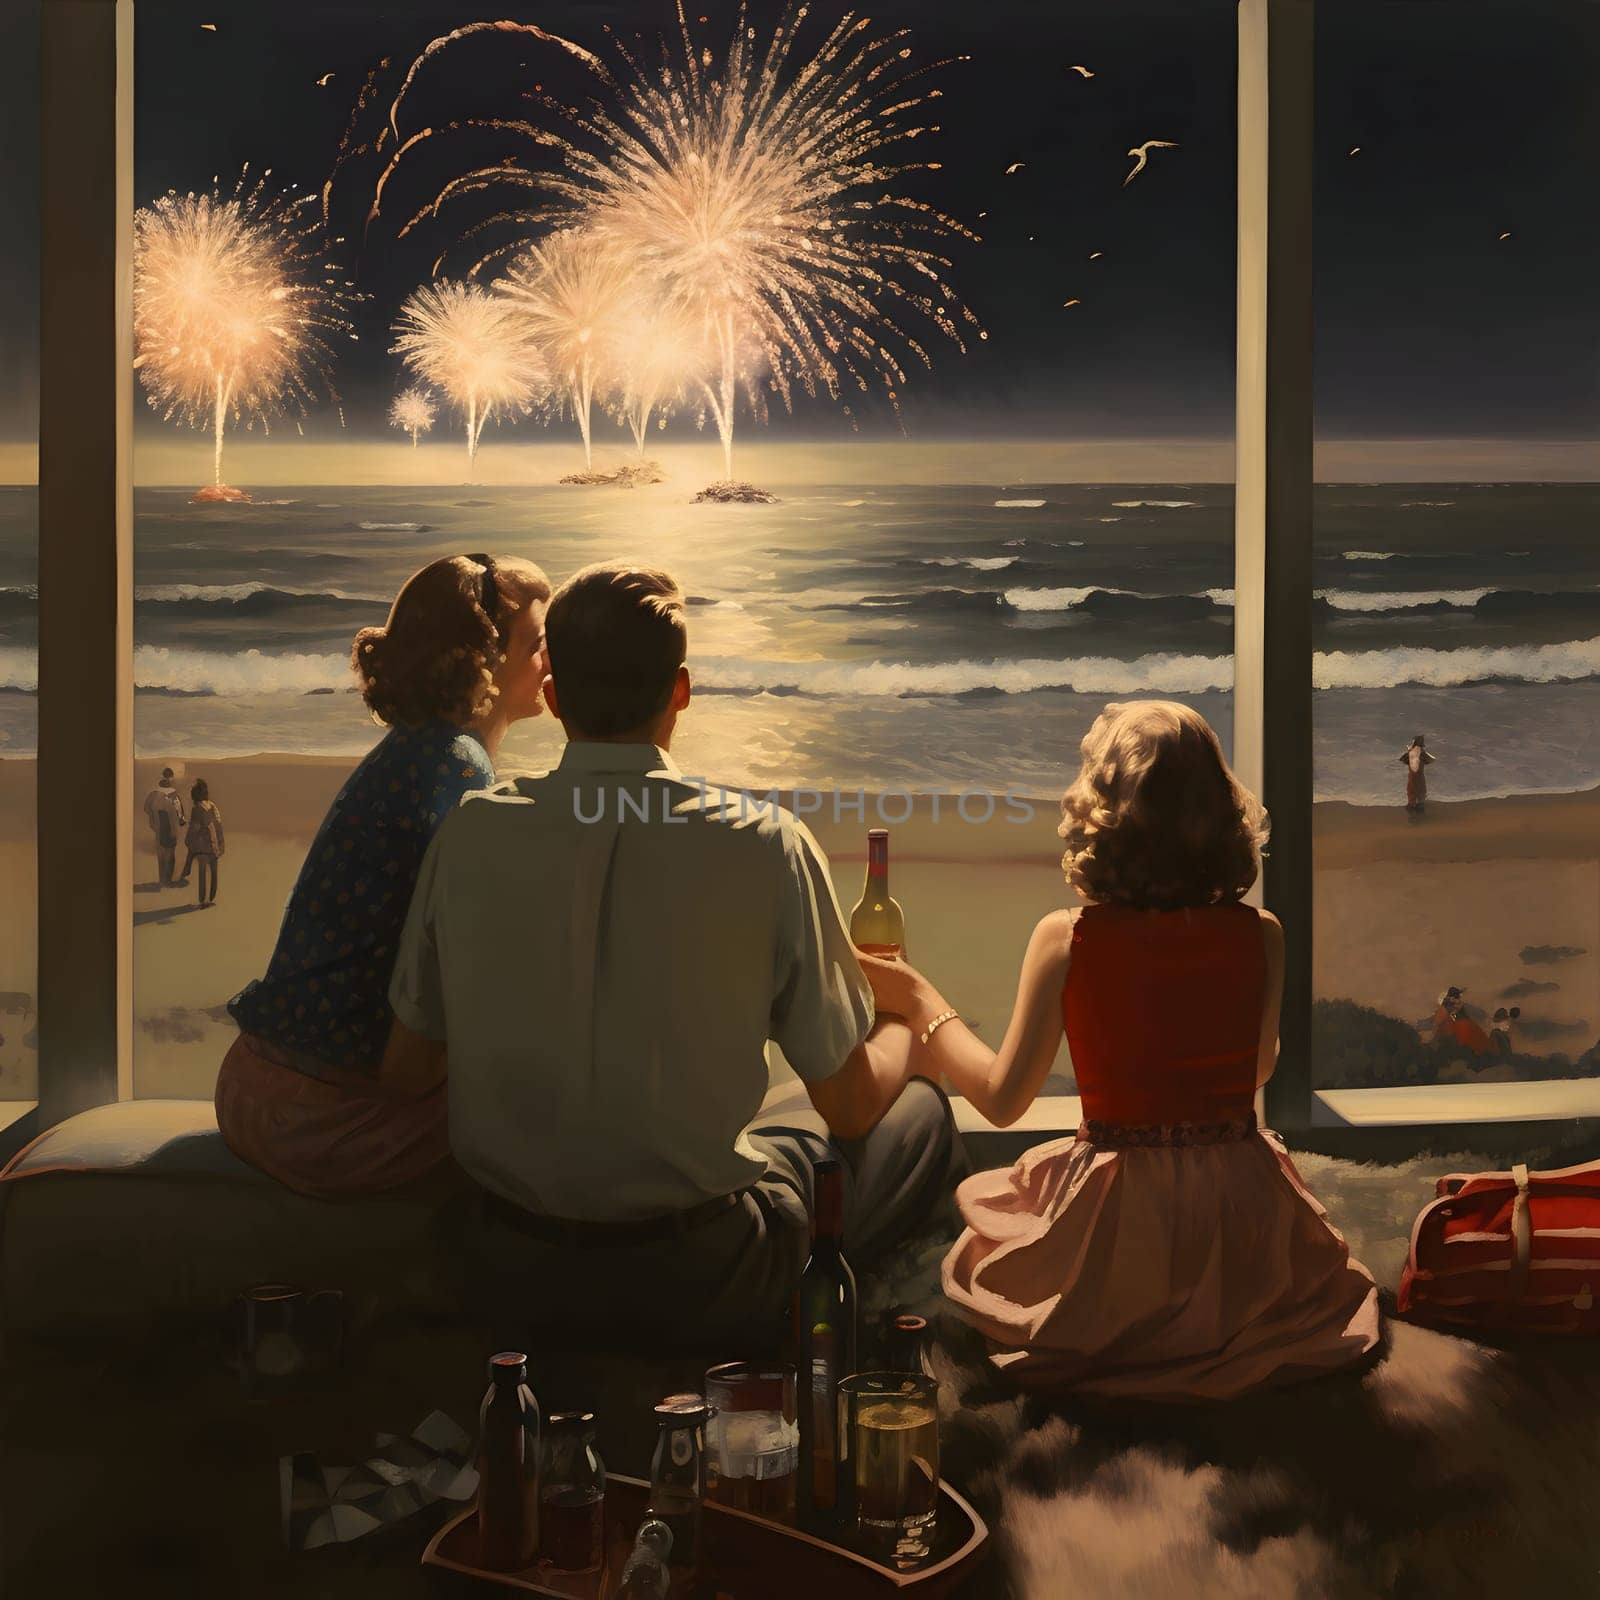 A 1930s-style family with champagne on the beach watching a fireworks display. New Year's fun and festivities. A time of celebration and resolutions.